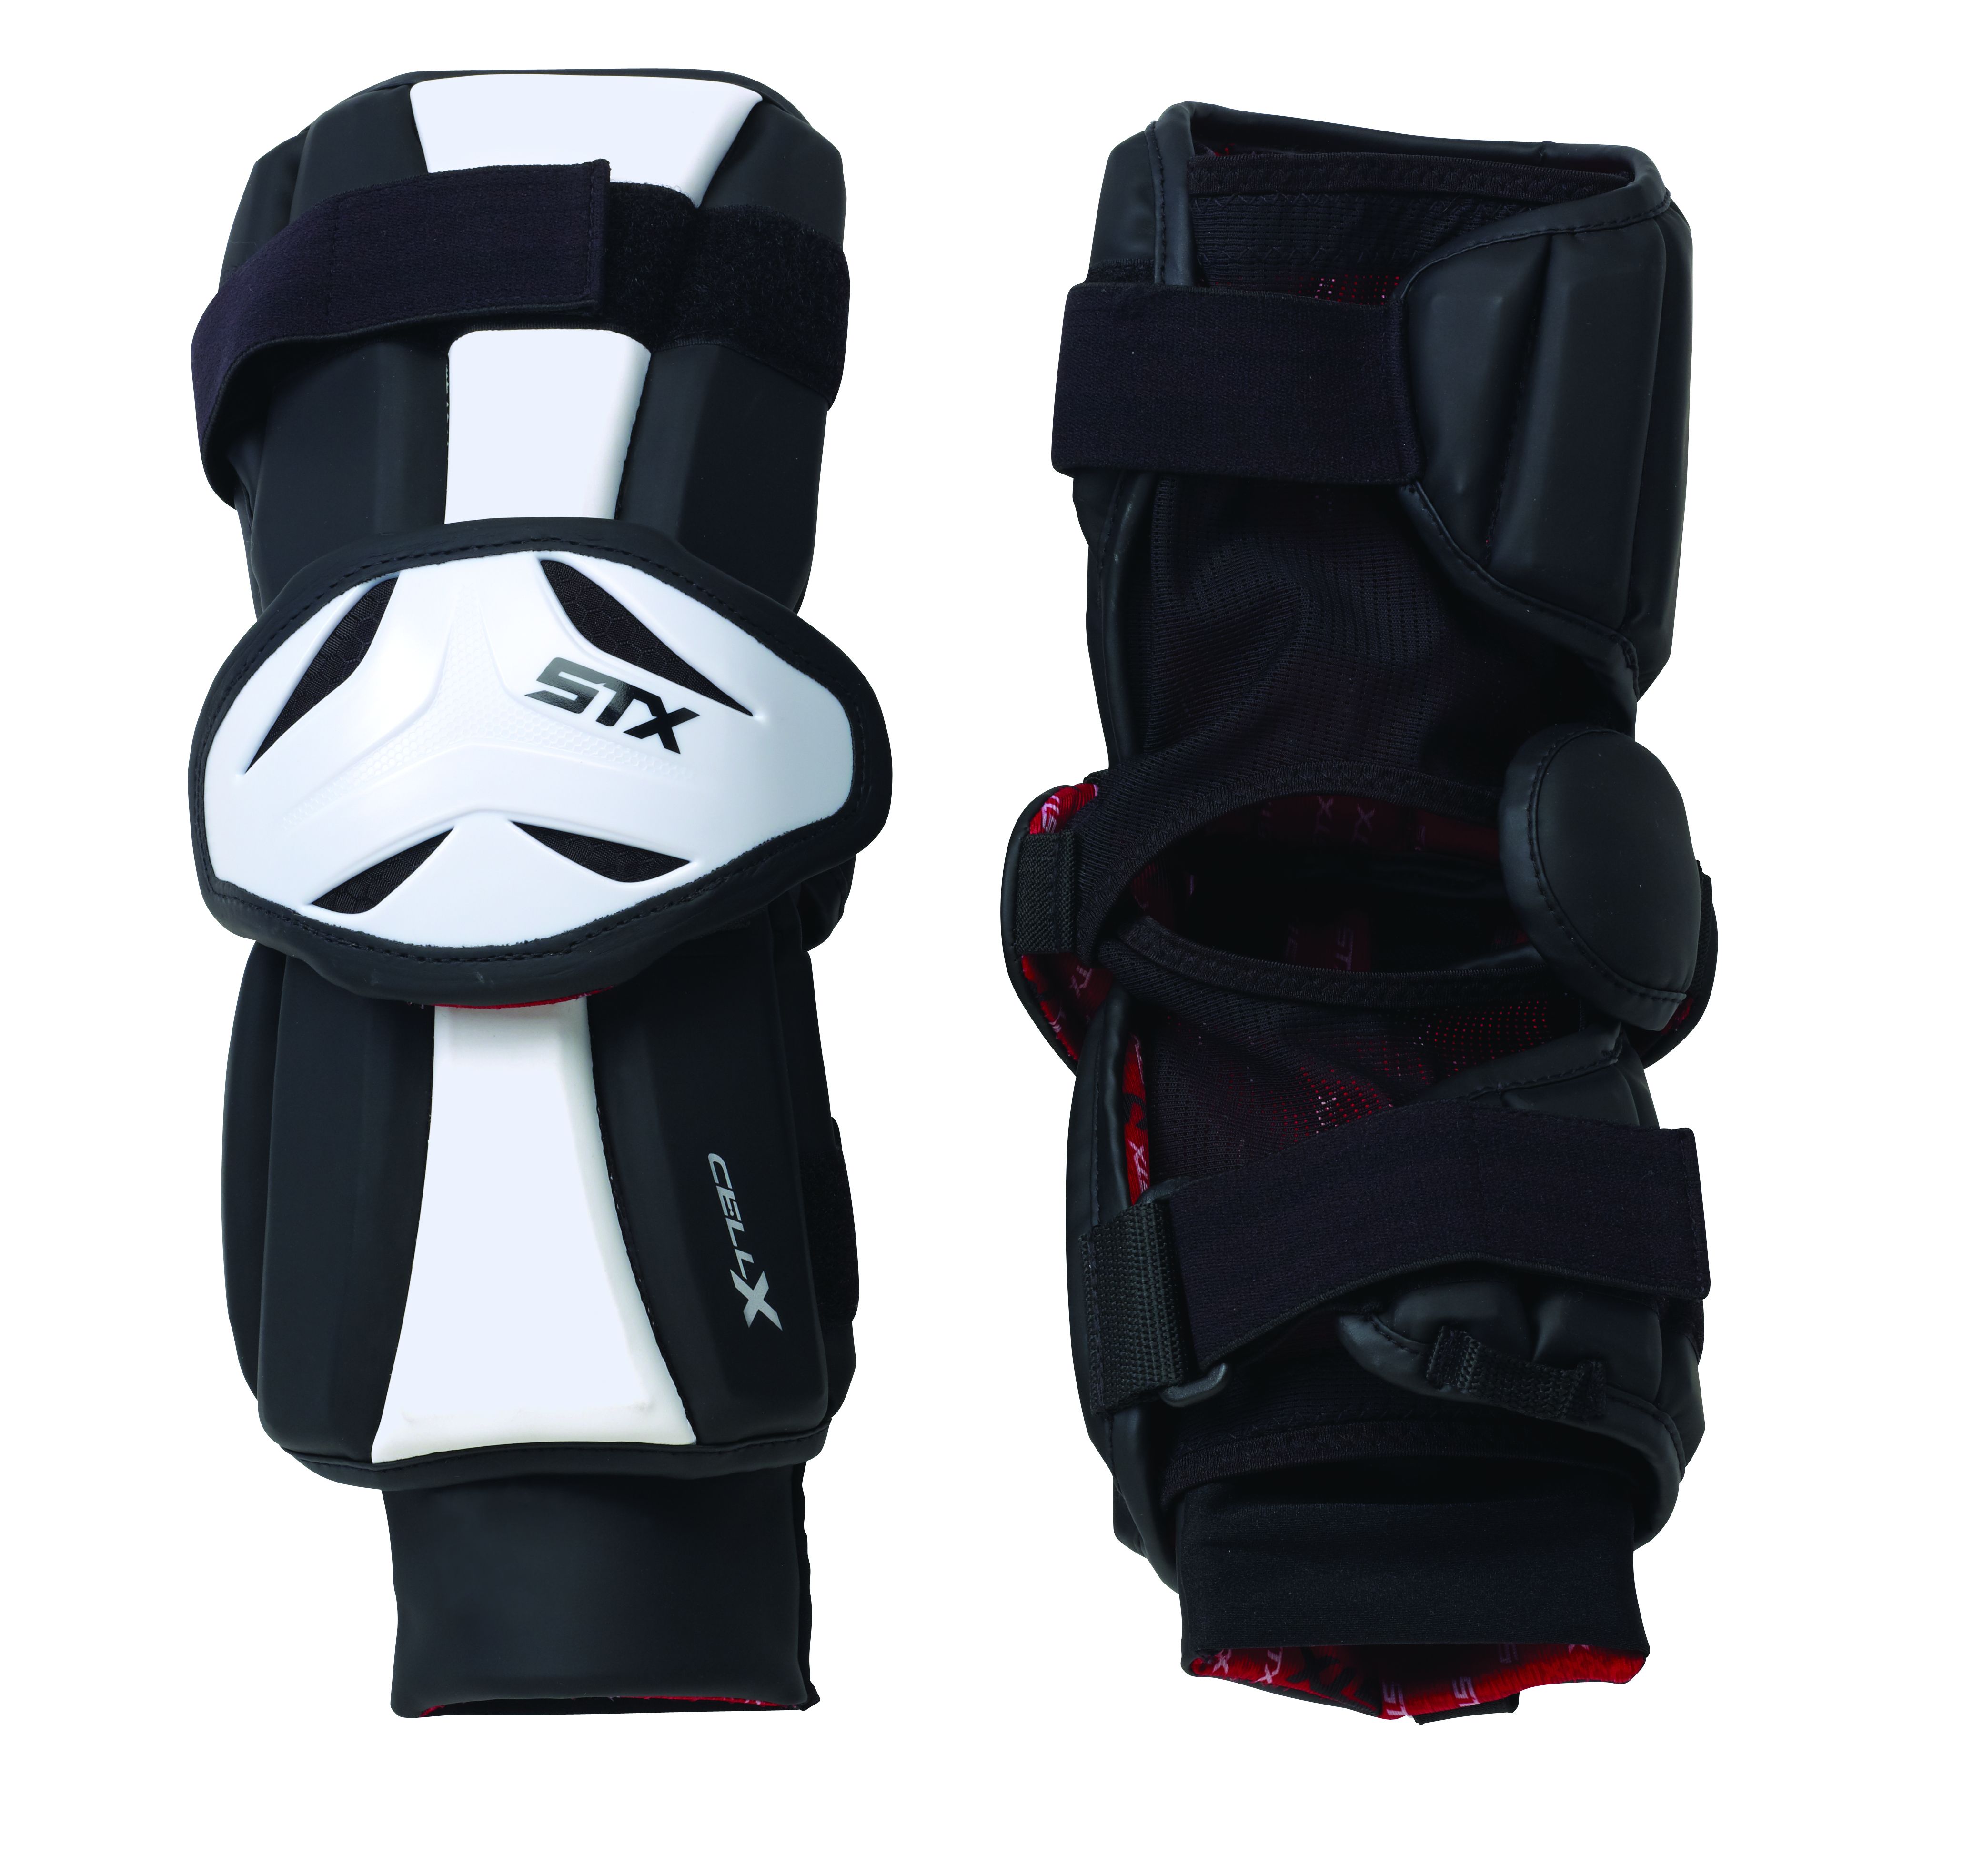 STX Cell 3 Lacrosse Arm Pad Bundle with 1 Performall Sports Bag